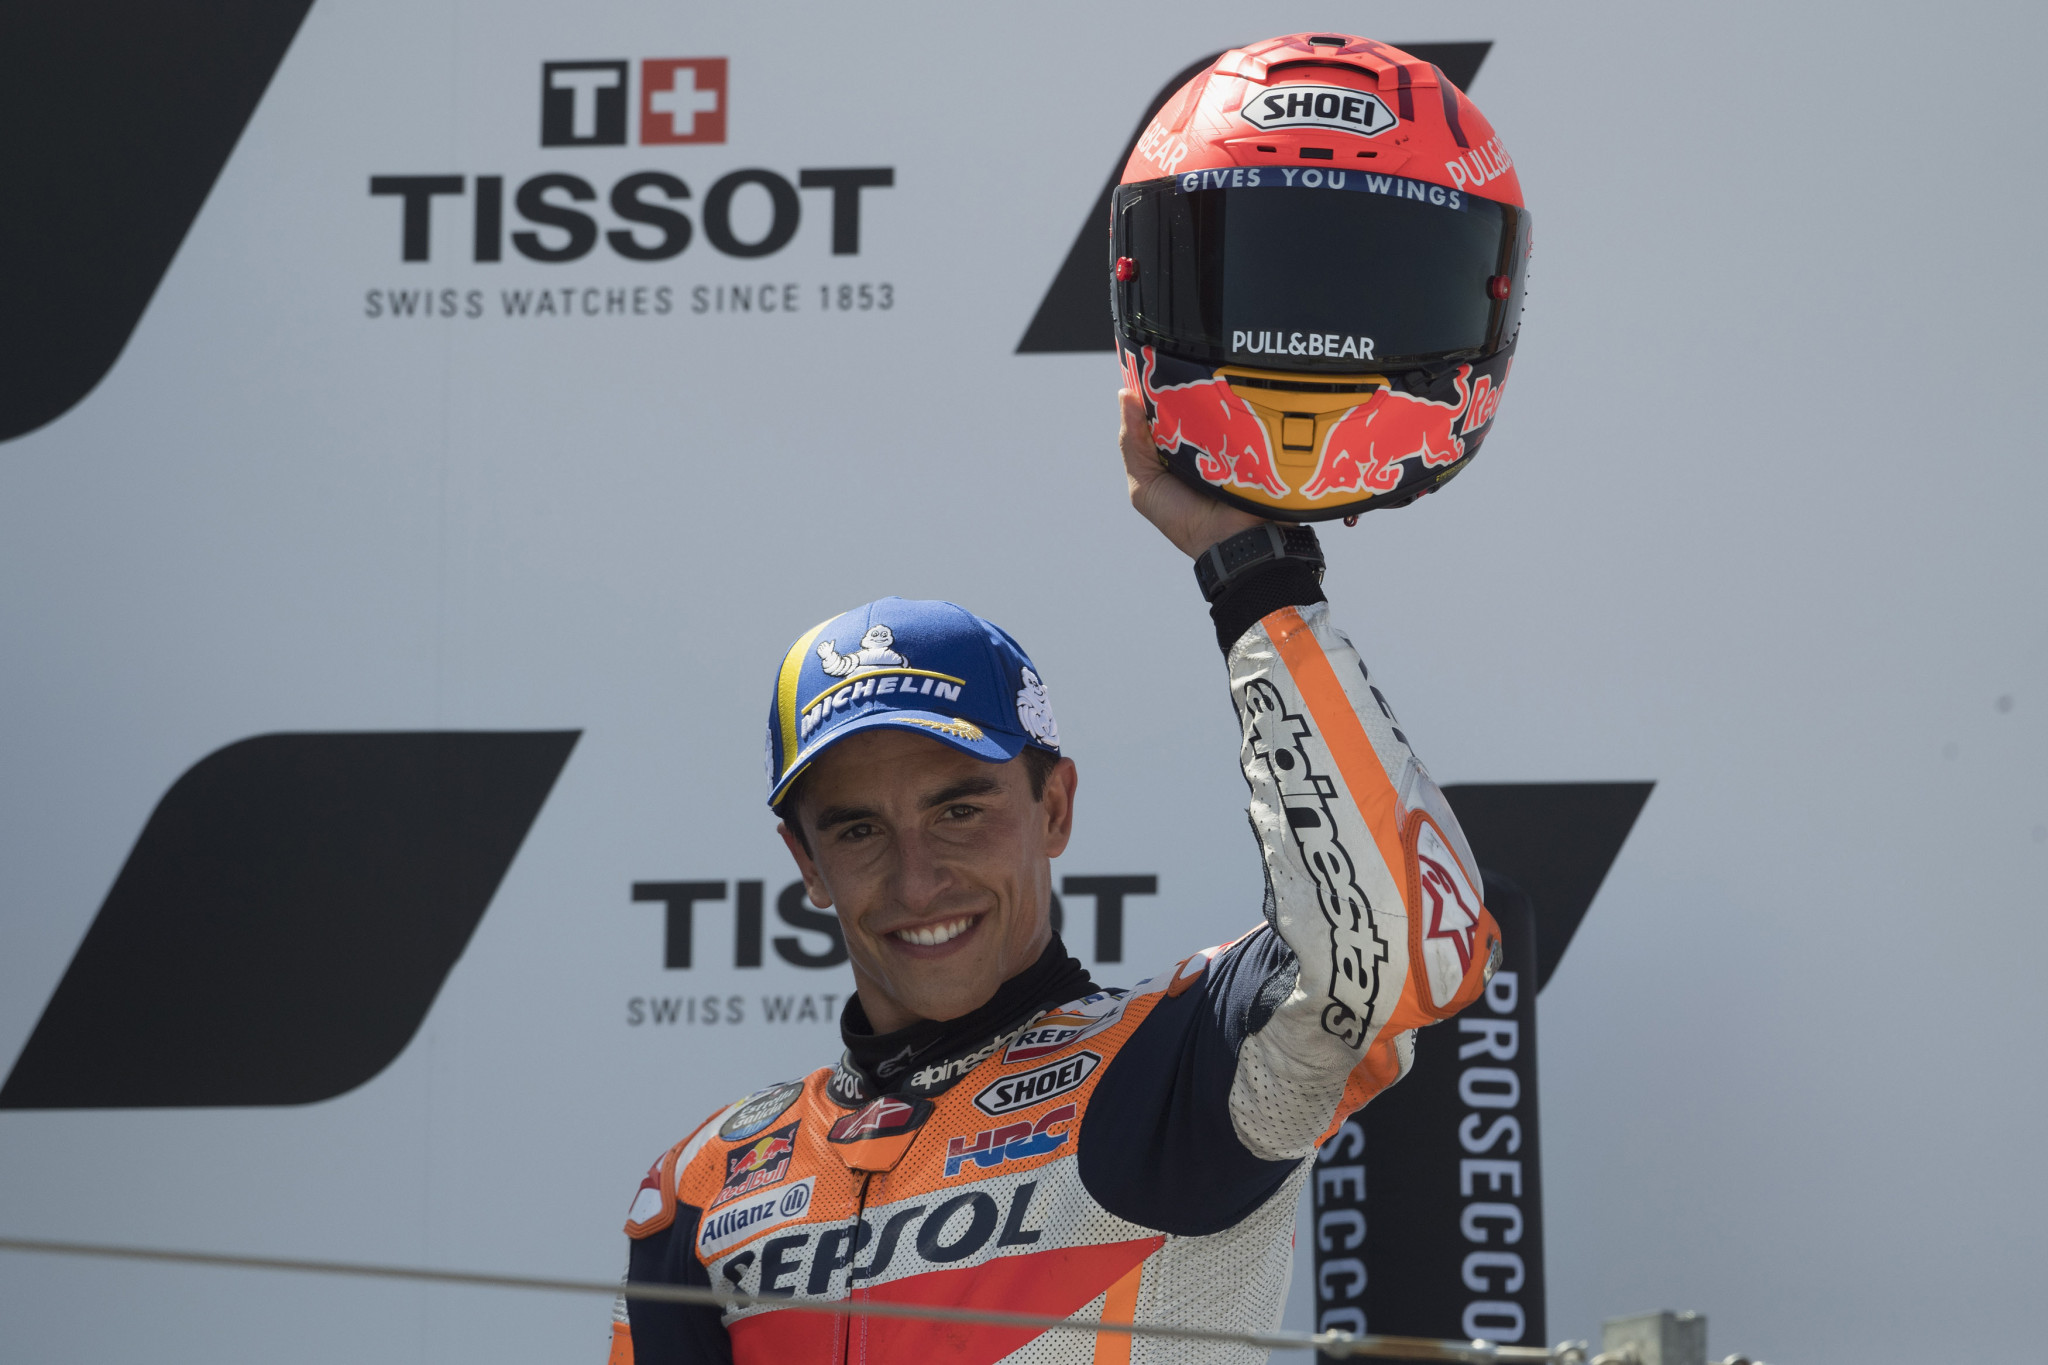 Spaniard Marc Márquez was the last winner of the MotoGP Argentine Grand Prix in 2019 ©Getty Images